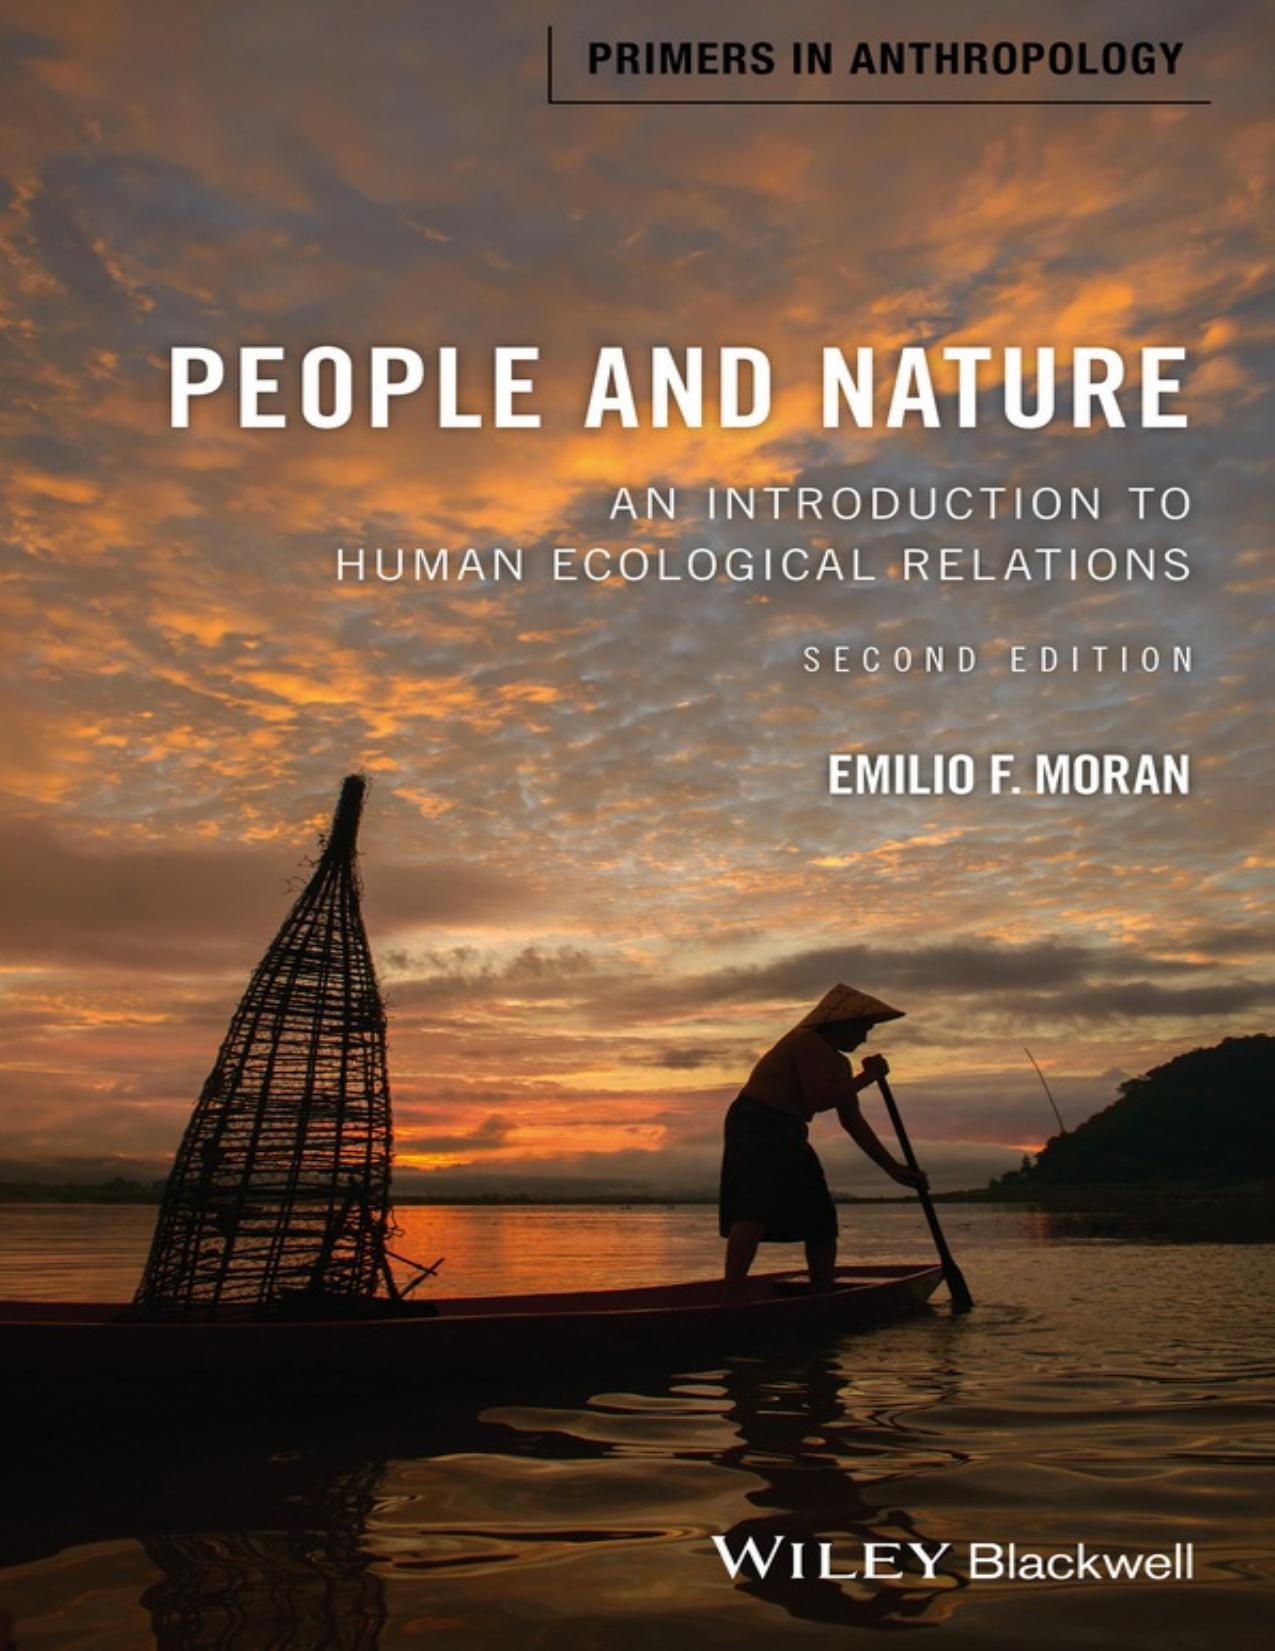 People and Nature: An Introduction to Human Ecological Relations - PDFDrive.com